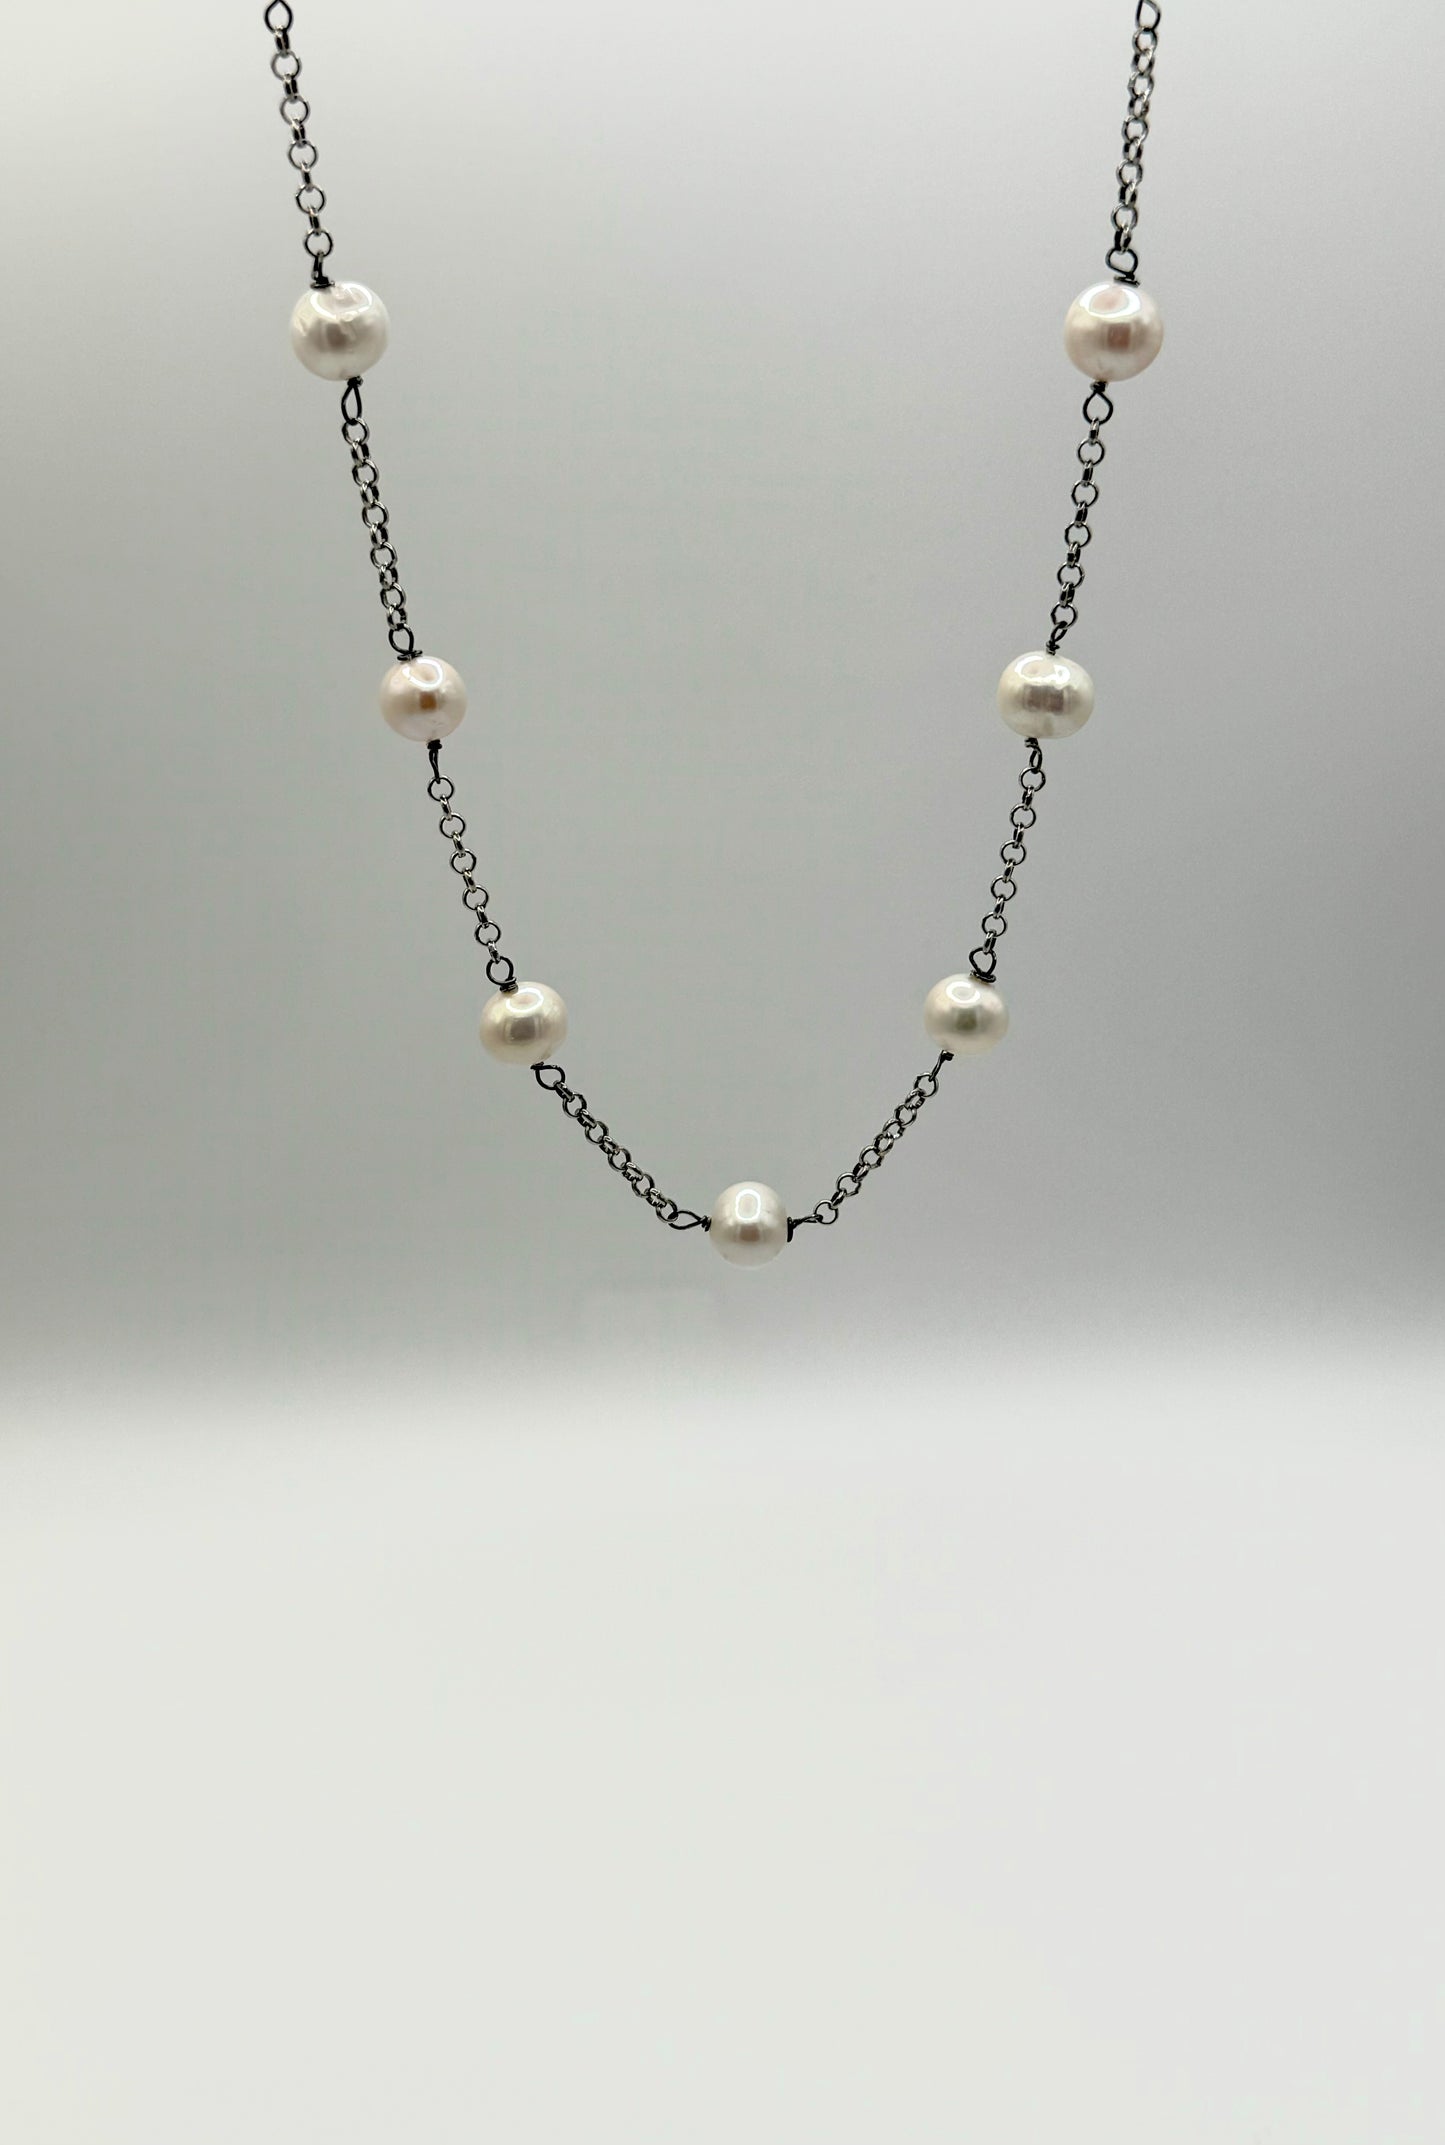 9.5mm White Freshwater Pearl Oxidized Silver Necklace